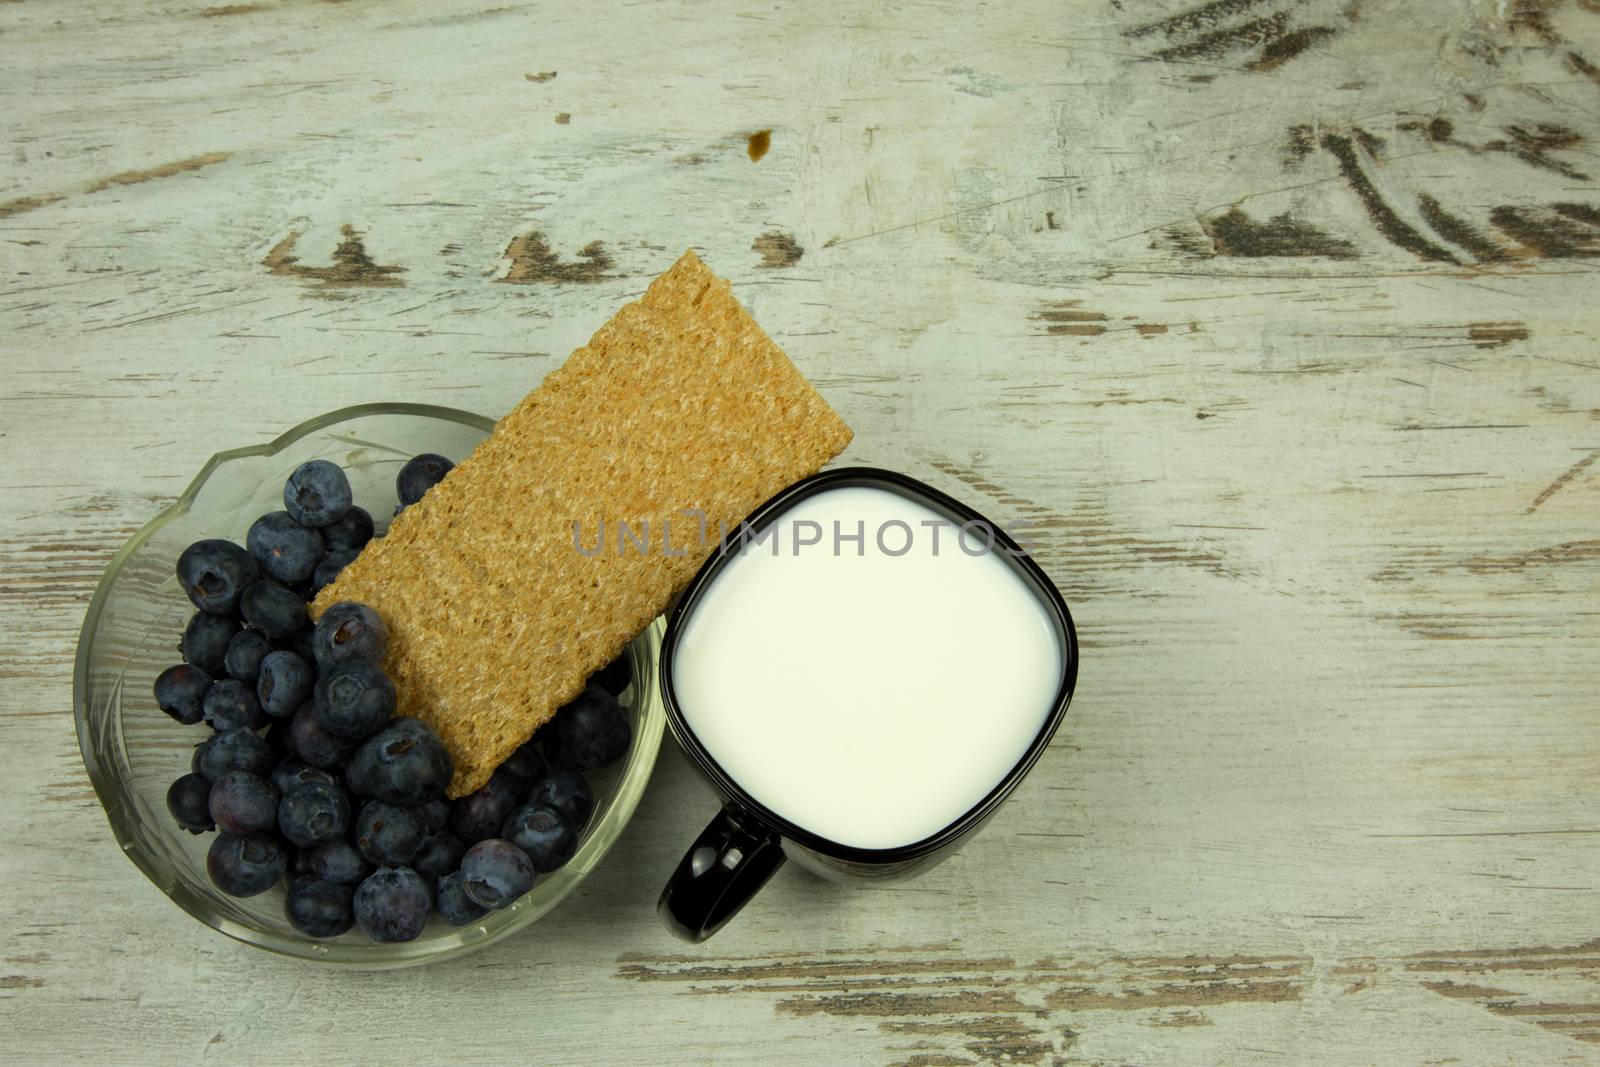 Cup of milk and crisp bread with cranberries in glass bowl on light,wooden table in vintage style.Flat,horizontal view.